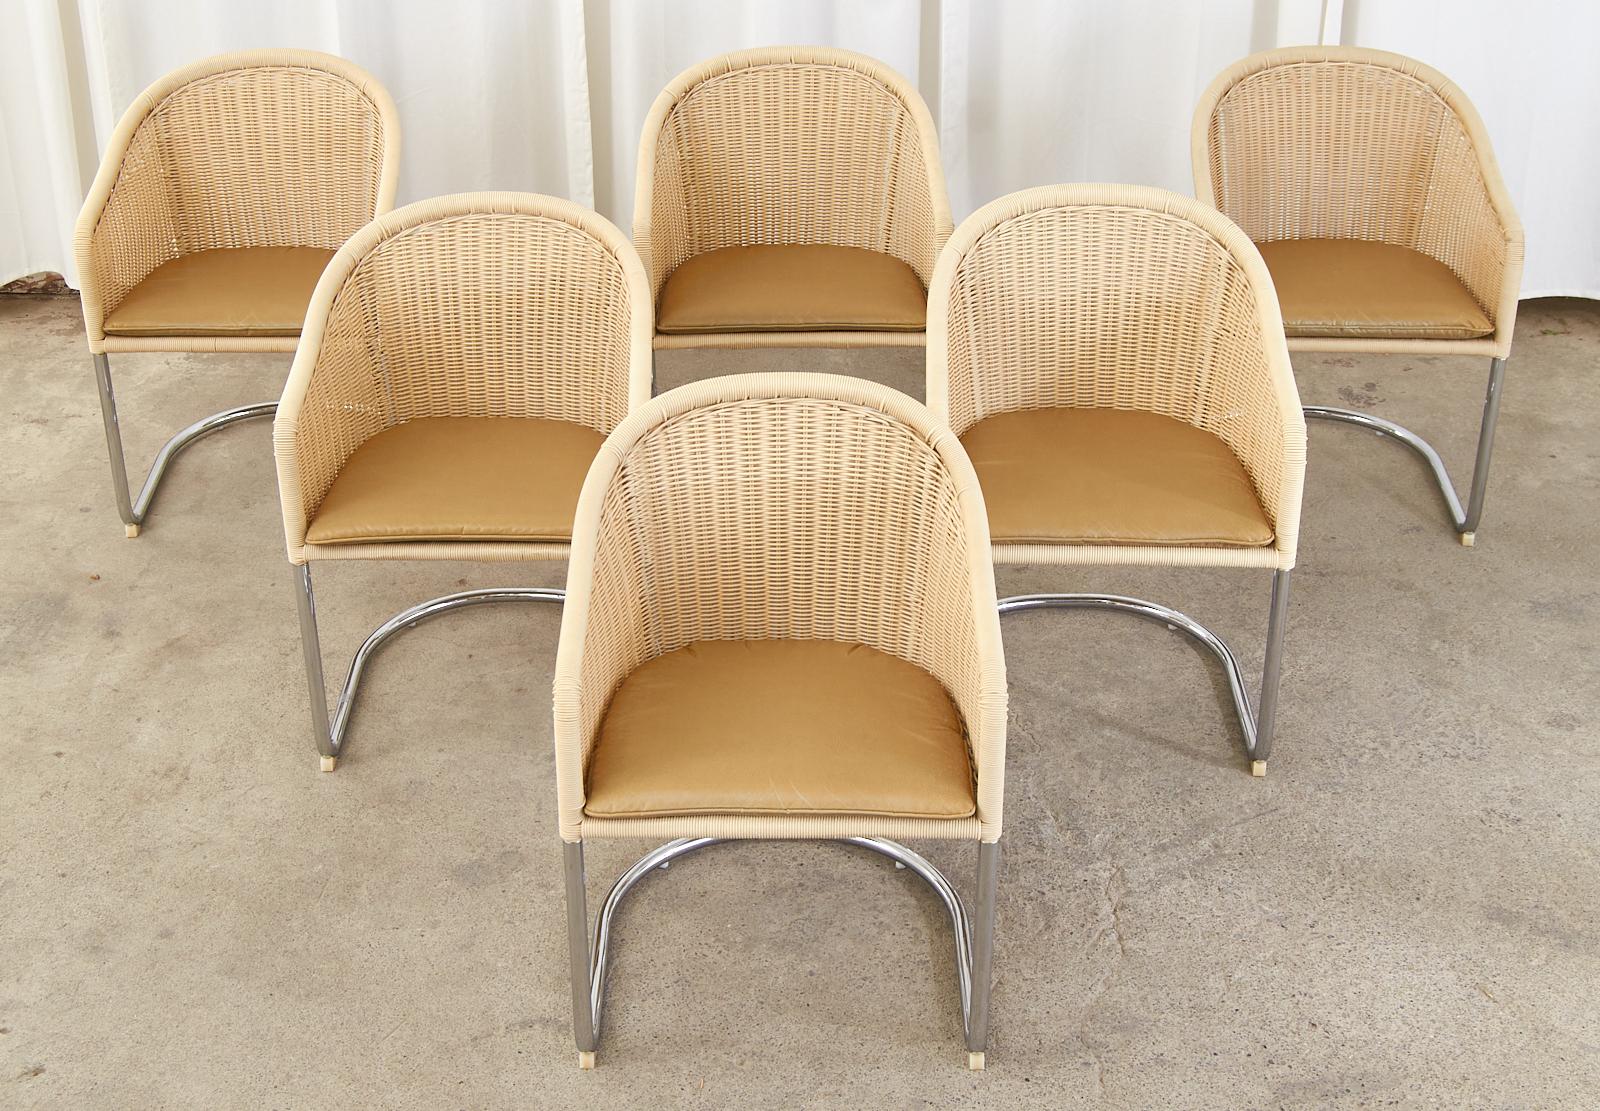 Iconic Mid-Century Modern set of six cantilever dining chairs or lounge chairs. Made in the manner and style of Harvey Probber featuring a chromed steel cantilever frame with a barrel back form. The frame has a faux-wicker resin woven basket style